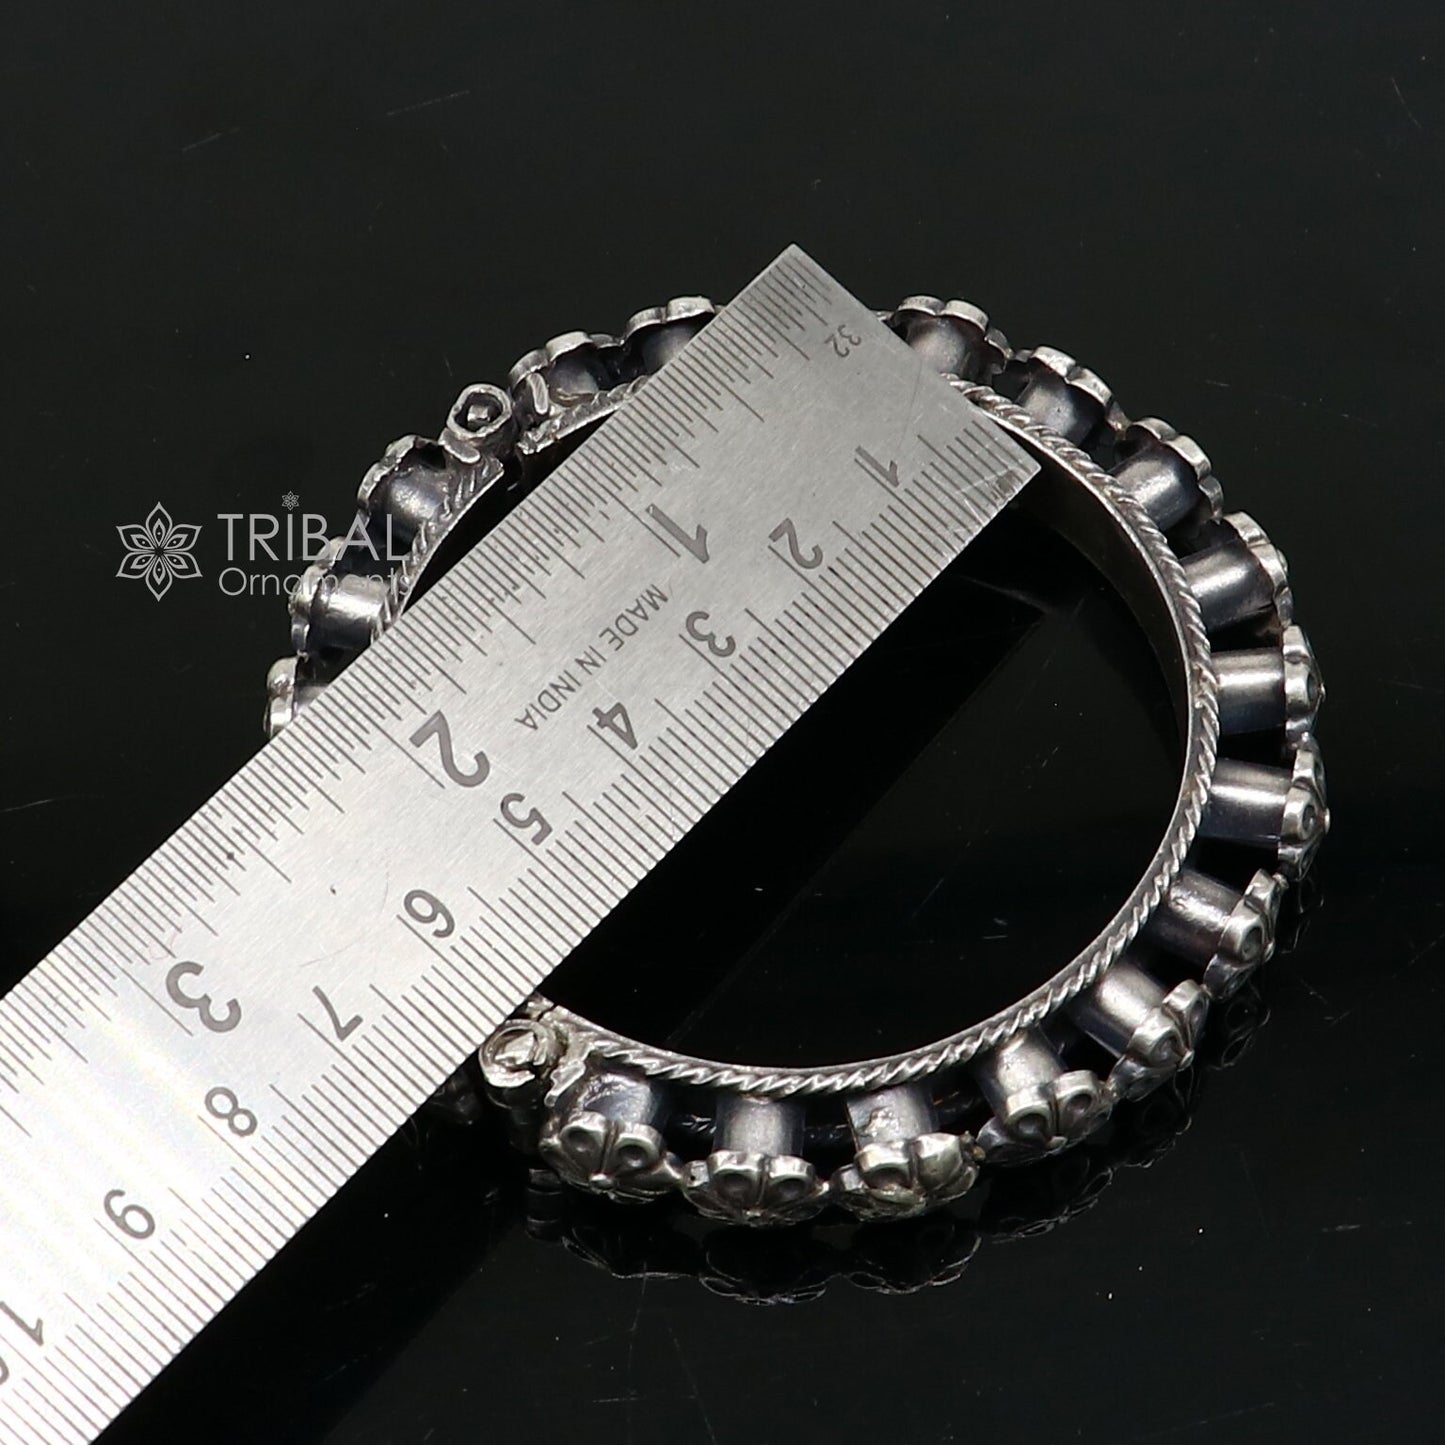 Exclusive trendy 925 sterling silver handmade unique tribal cultural bangle bracelet kada functional brides wedding jewelry nba385 - TRIBAL ORNAMENTS